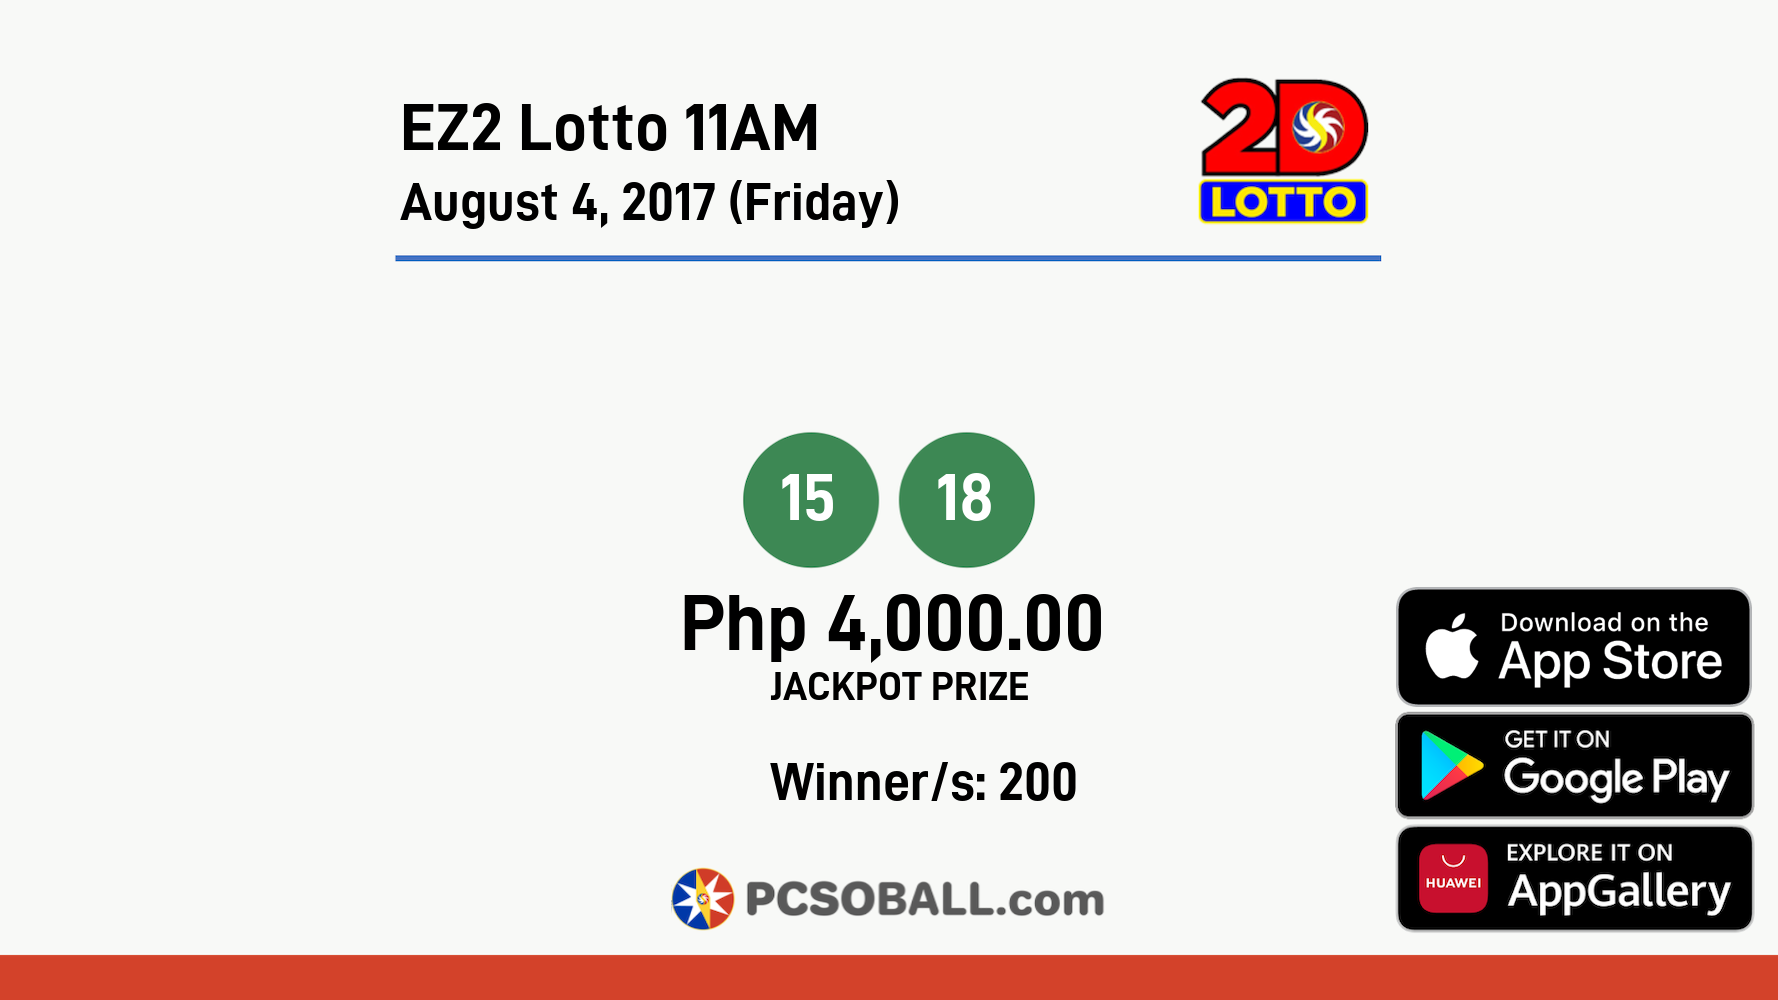 EZ2 Lotto 11AM August 4, 2017 (Friday) Result